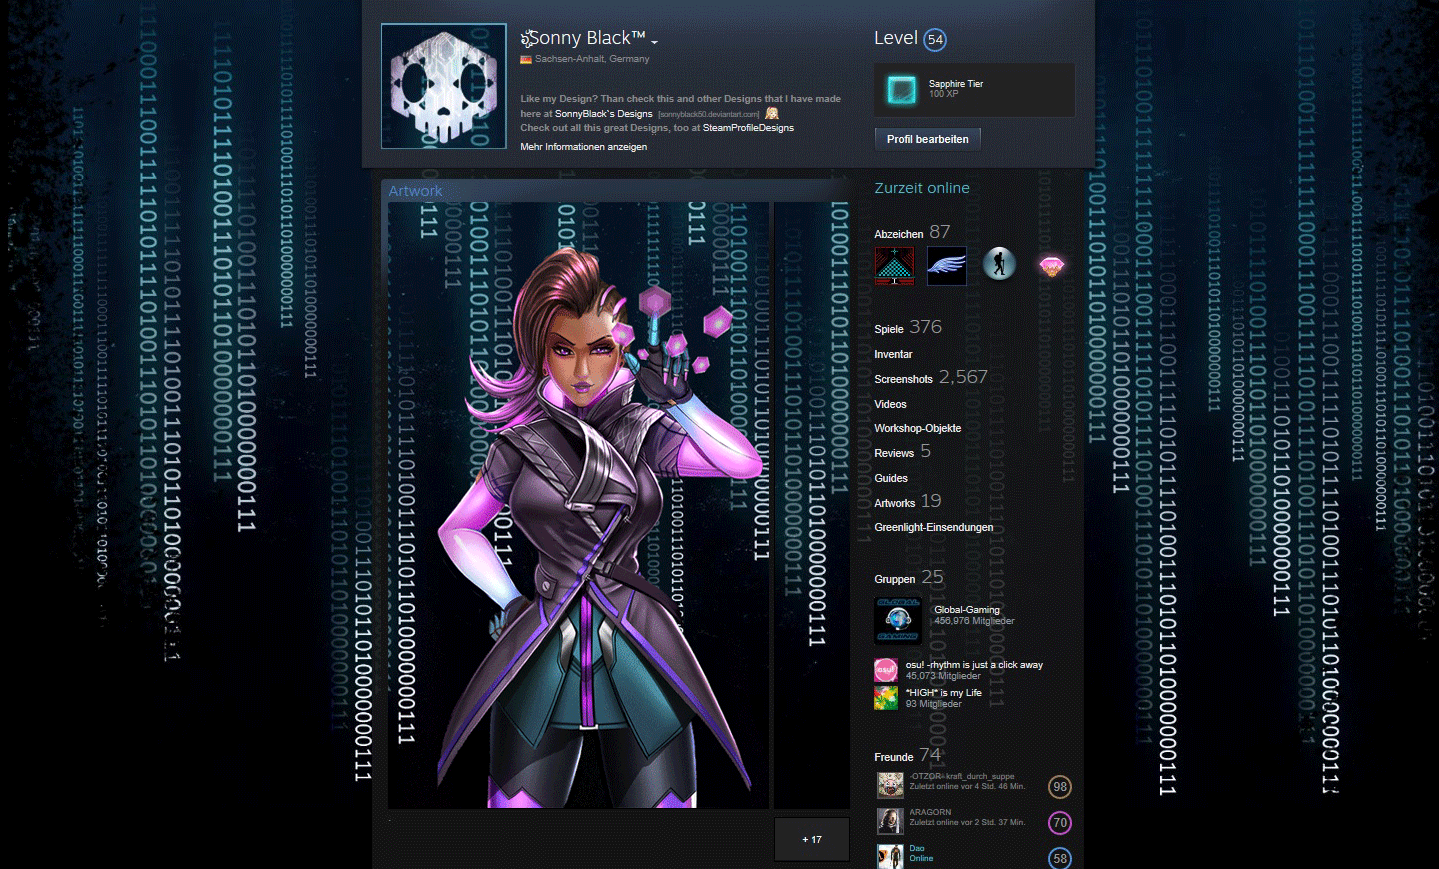 Overwatch Sombra Steam Profile Design [Animated] by SonnyBlack50 on